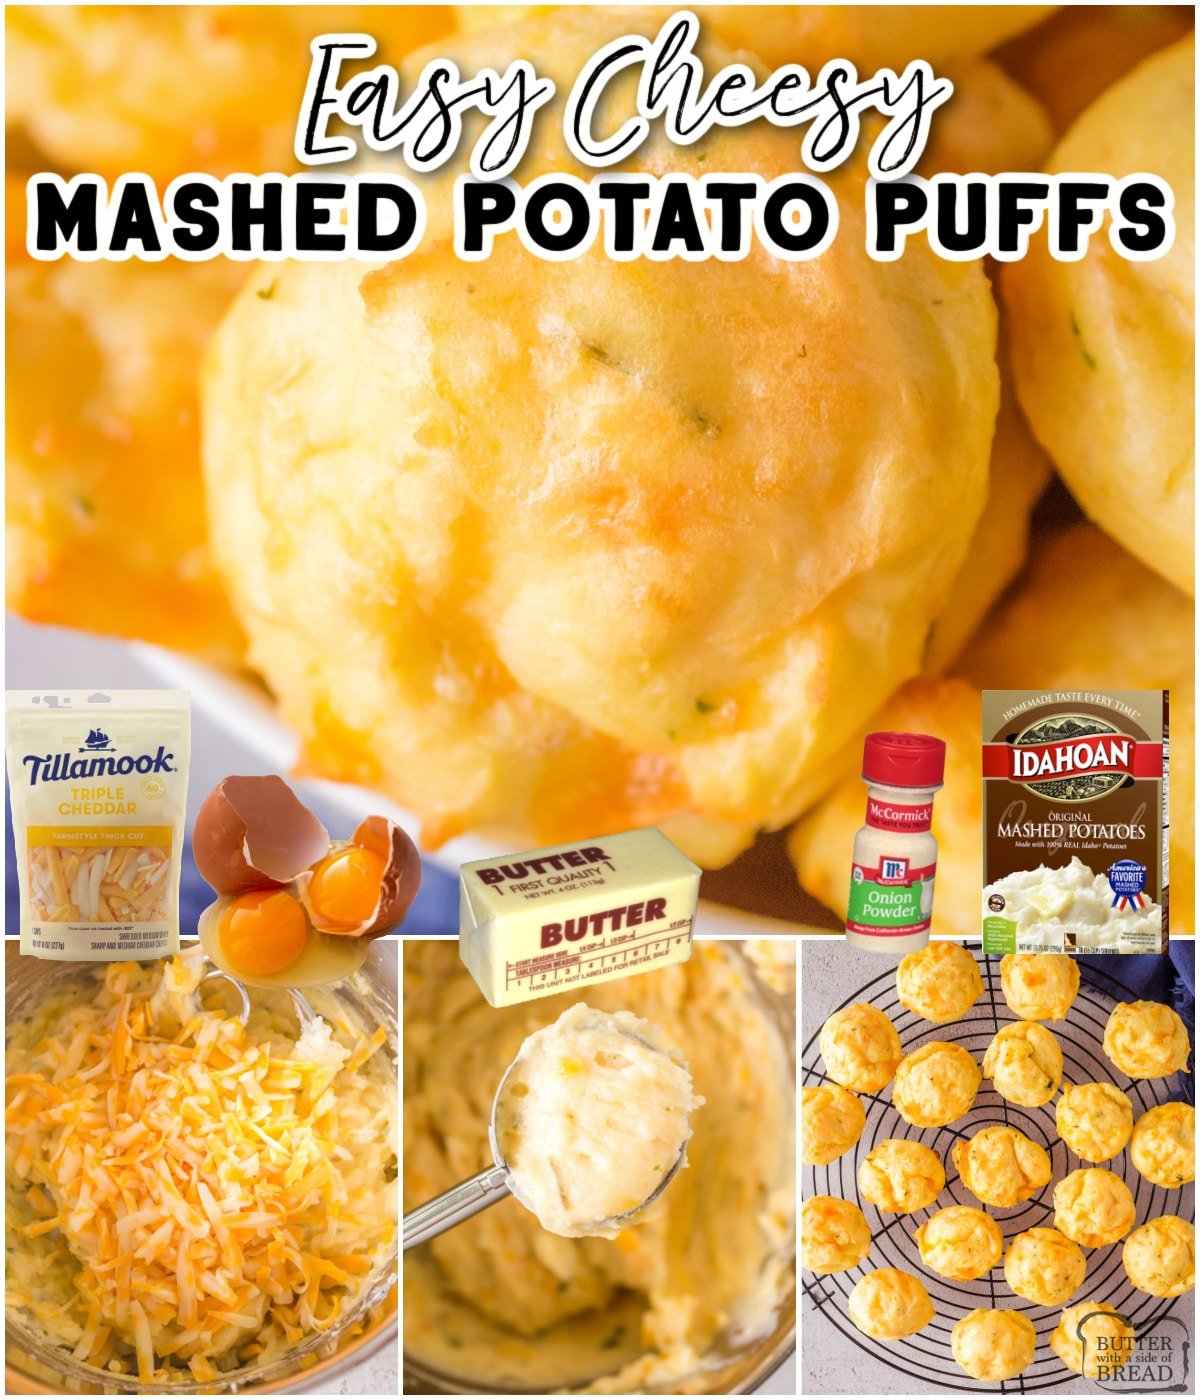 Cheesy Mashed Potato Puffs are mashed potatoes combined with flour, eggs & cheese & baked until puffy & golden brown. These buttery potato poppers are crispy on the outside, creamy on the inside & utterly delicious!